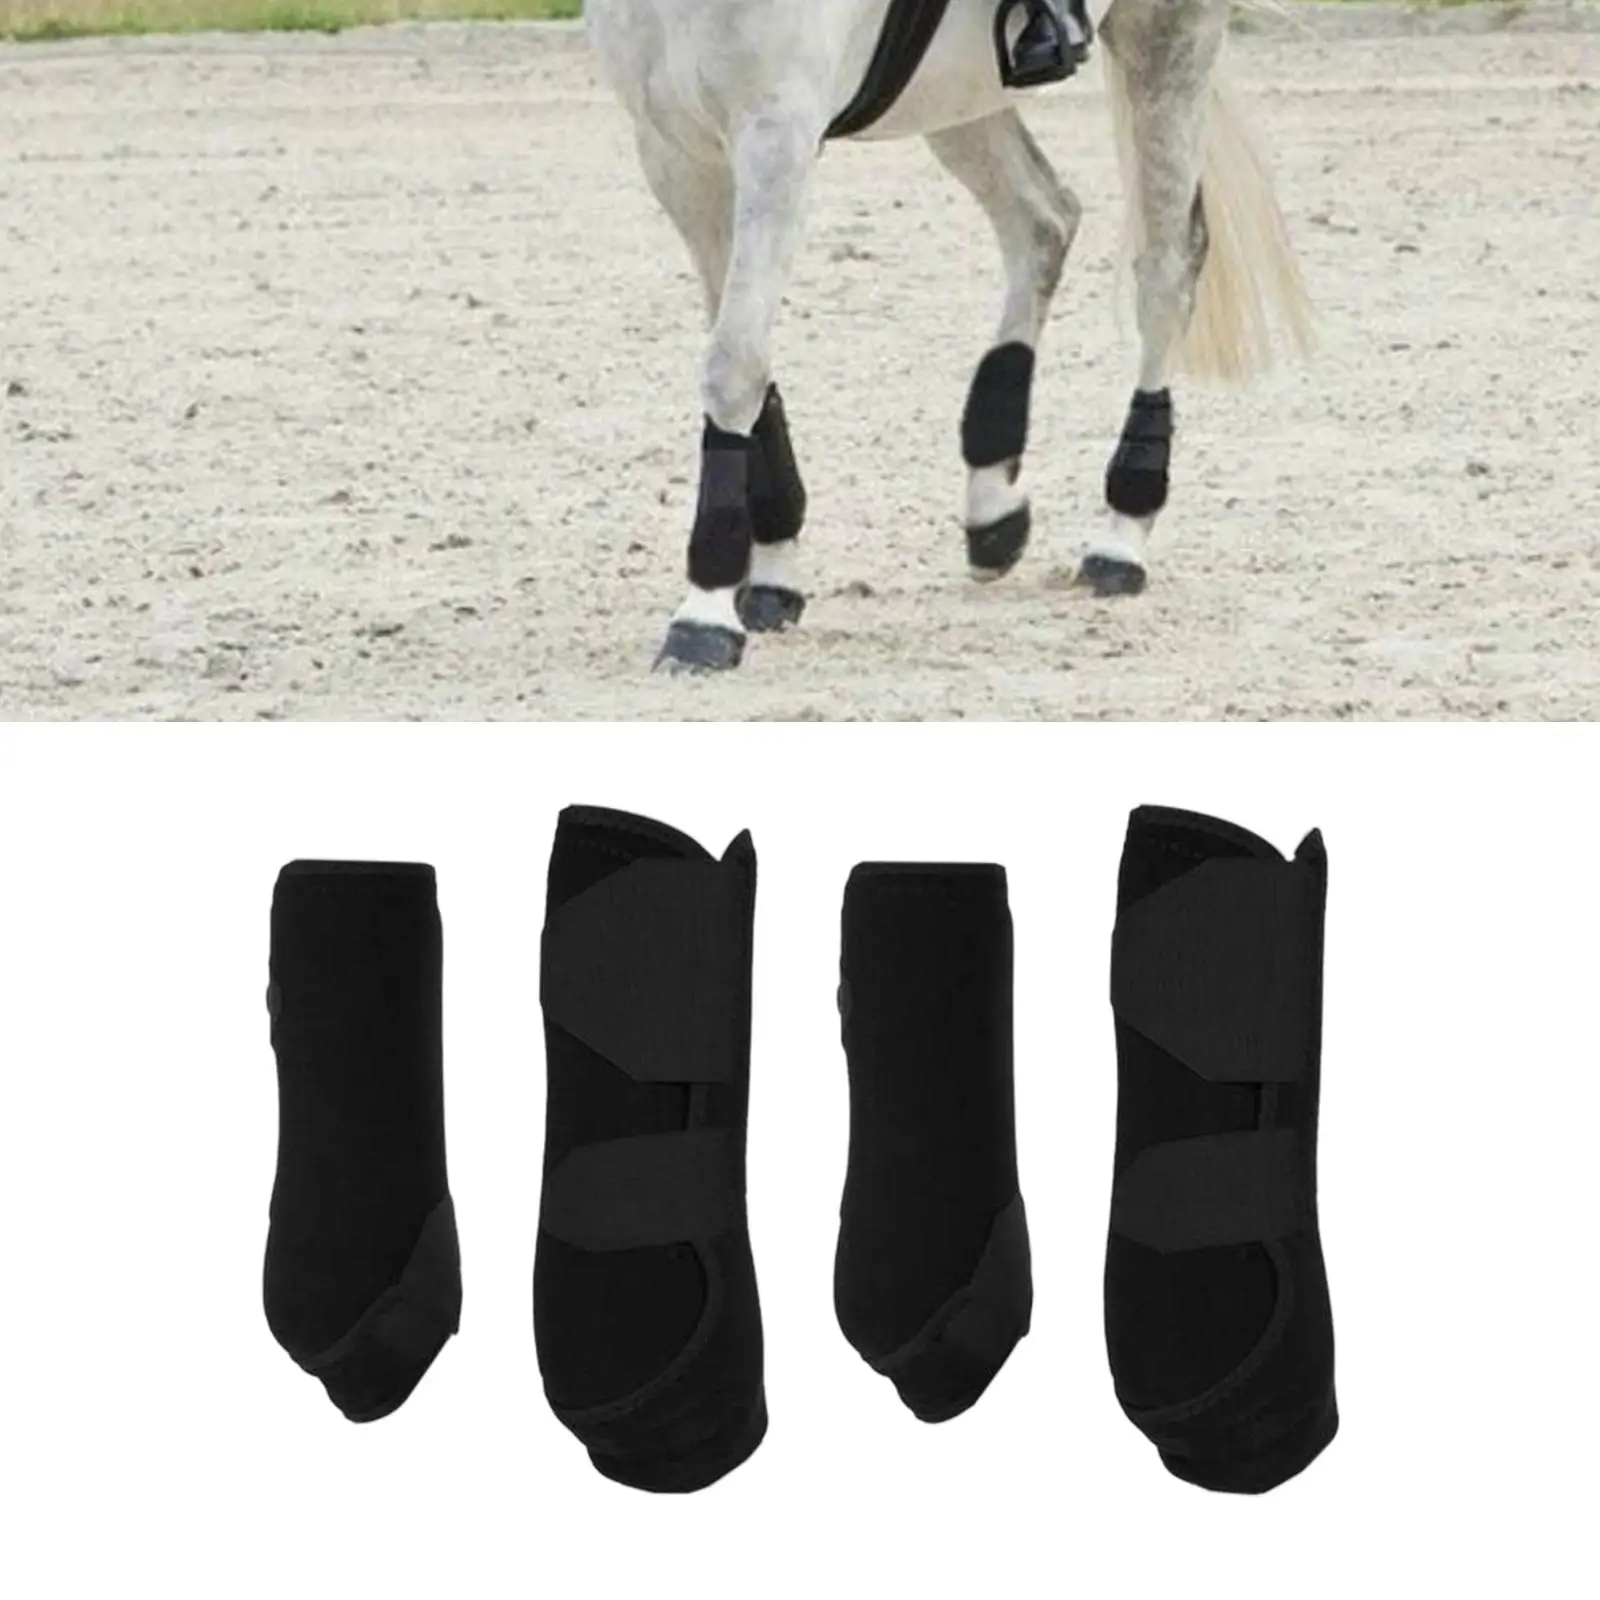 4x Neoprene Horse Boots Leg Protection Wraps Shockproof Protector Gear for Jumping Training Riding Equestrian Equipment